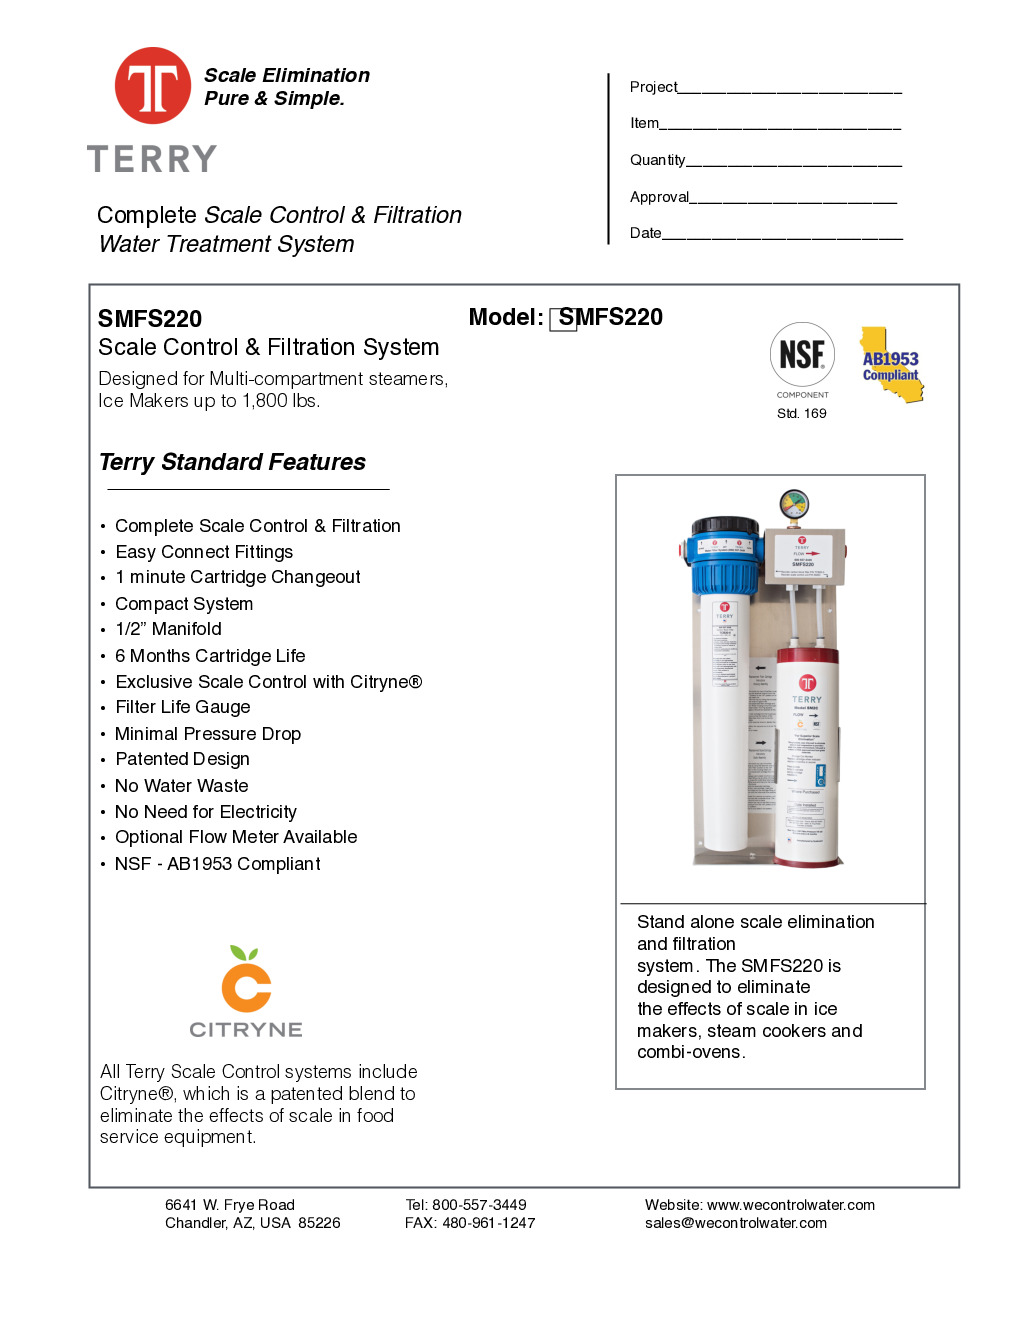 Terry (Middleby) SMFS220 for Multiple Applications Water Filtration System